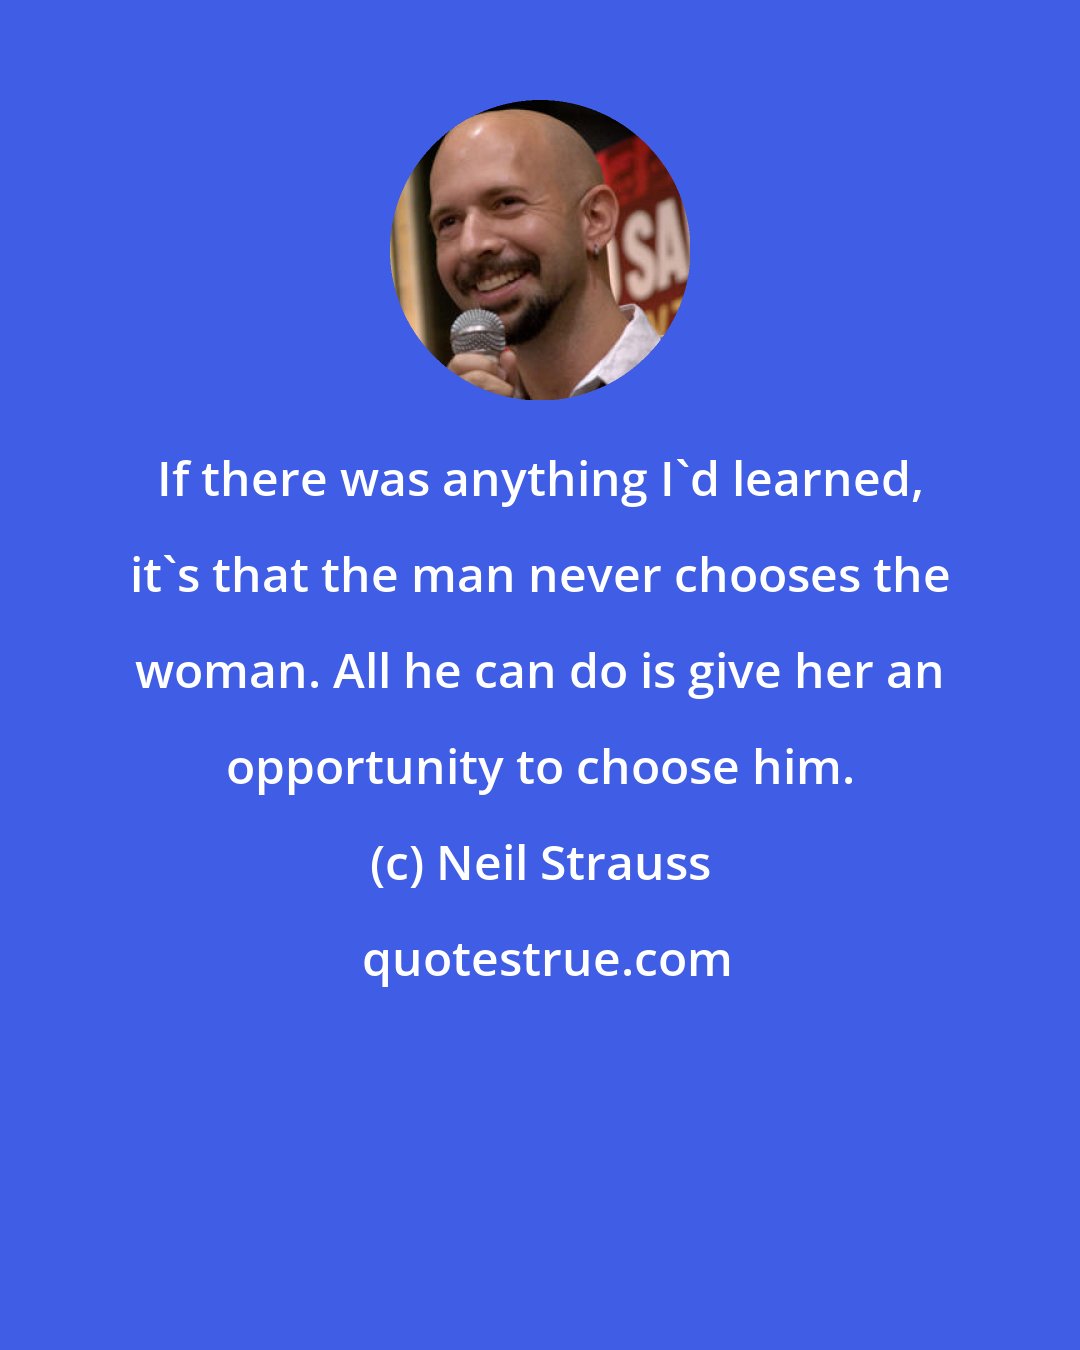 Neil Strauss: If there was anything I'd learned, it's that the man never chooses the woman. All he can do is give her an opportunity to choose him.